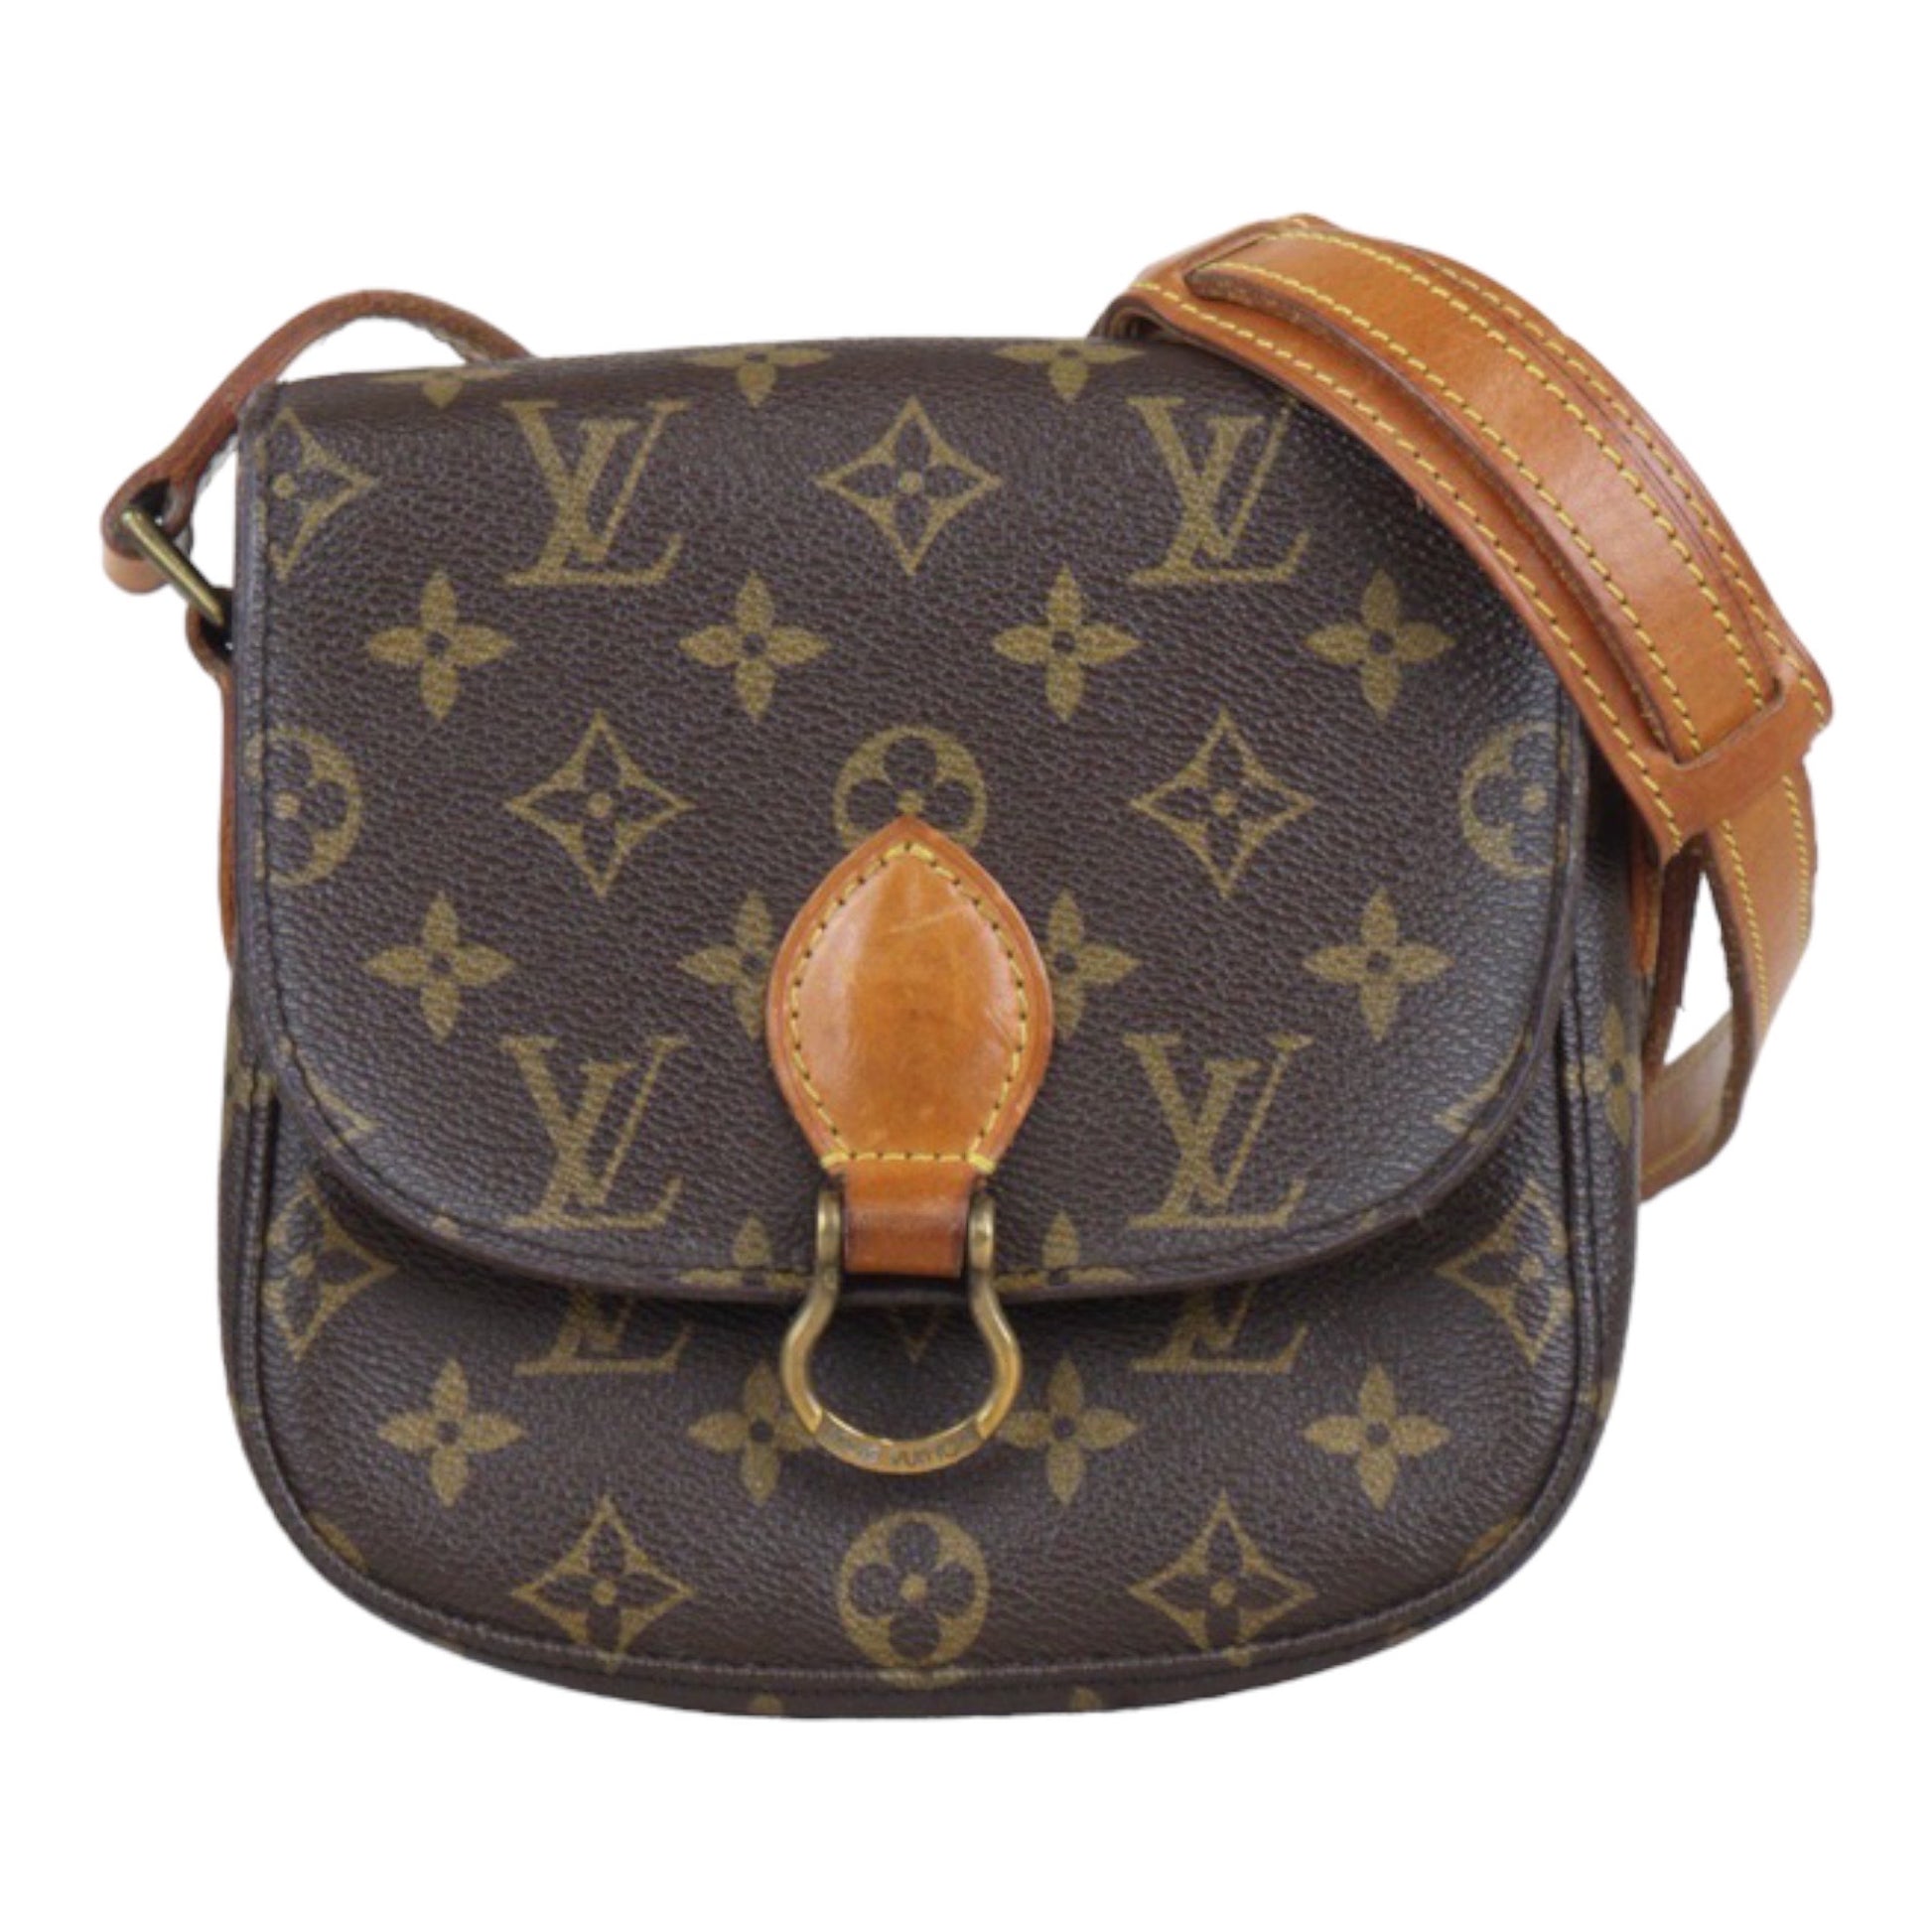 Sold at Auction: A LOUIS VUITTON MONOGRAM LEATHER CROSSBODY SADDLE BAG